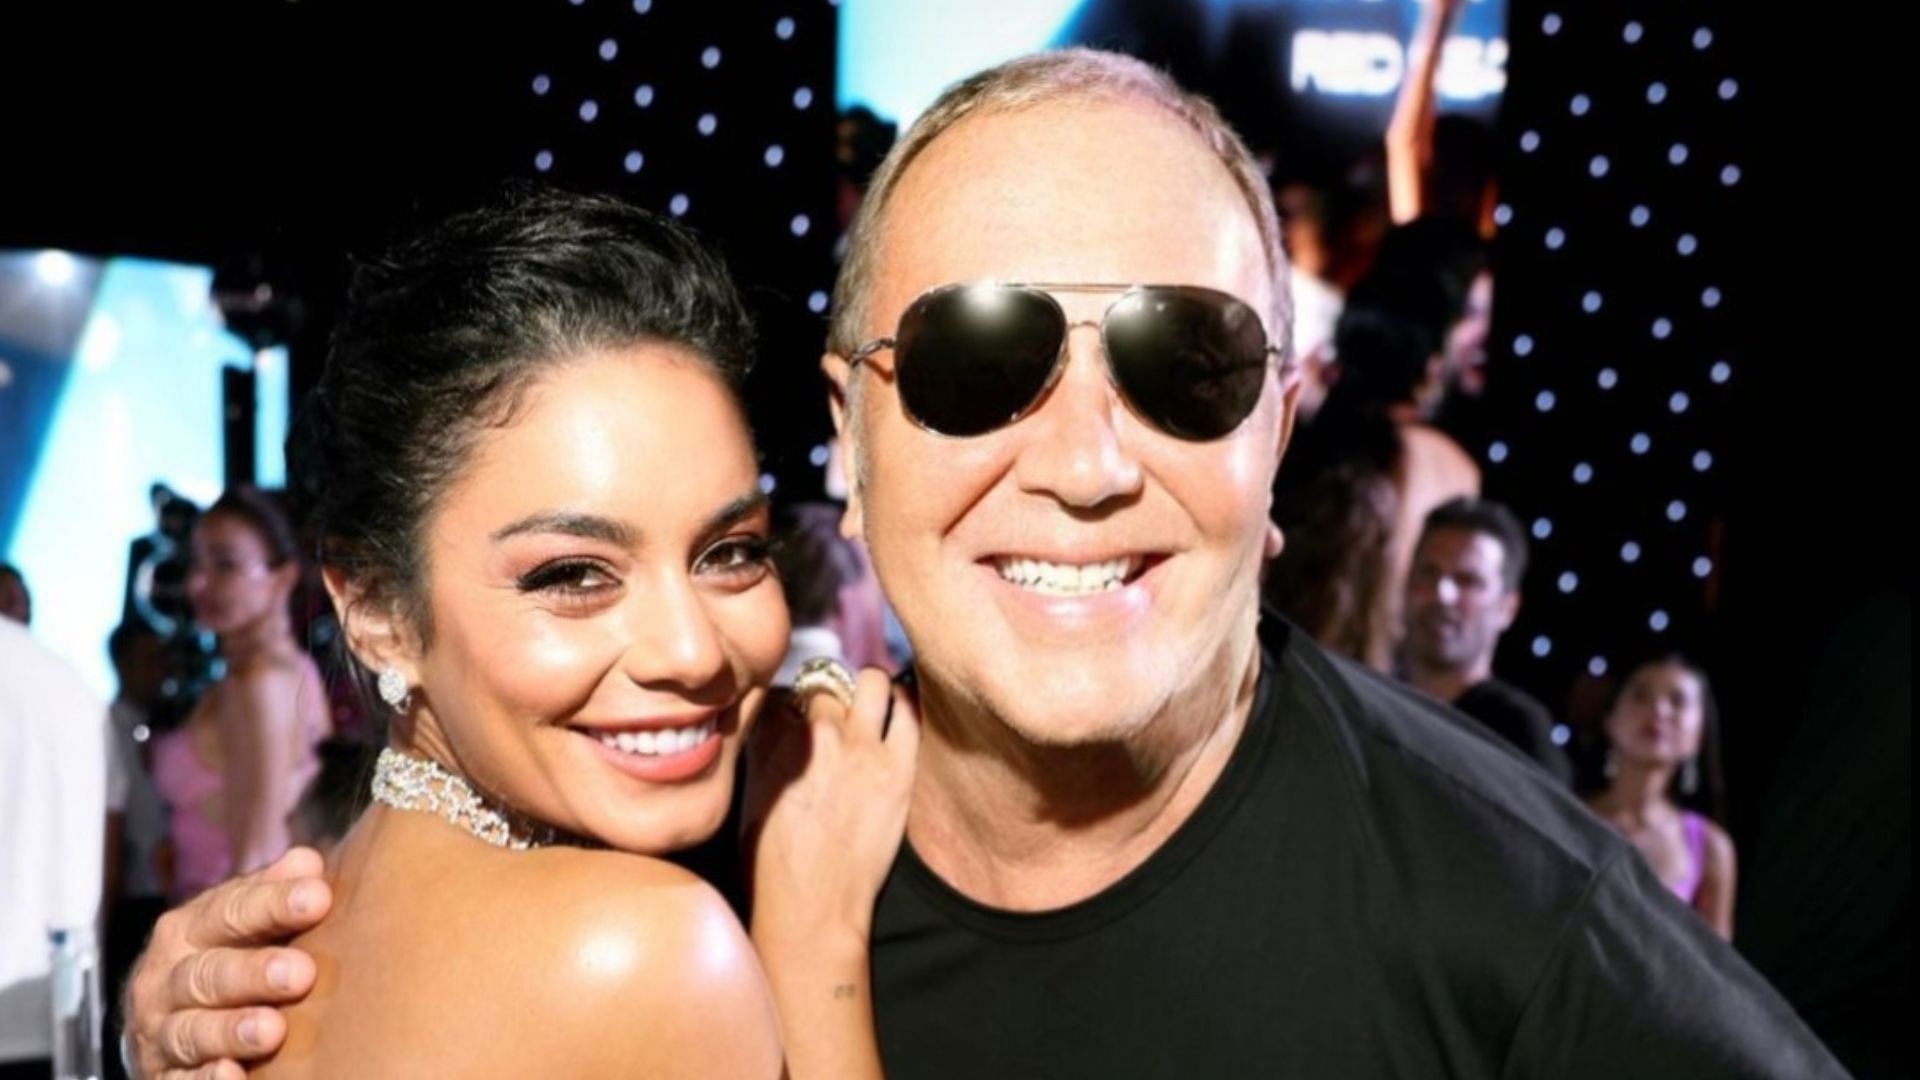 Hudgens poses with Michael Kors at the charity event.